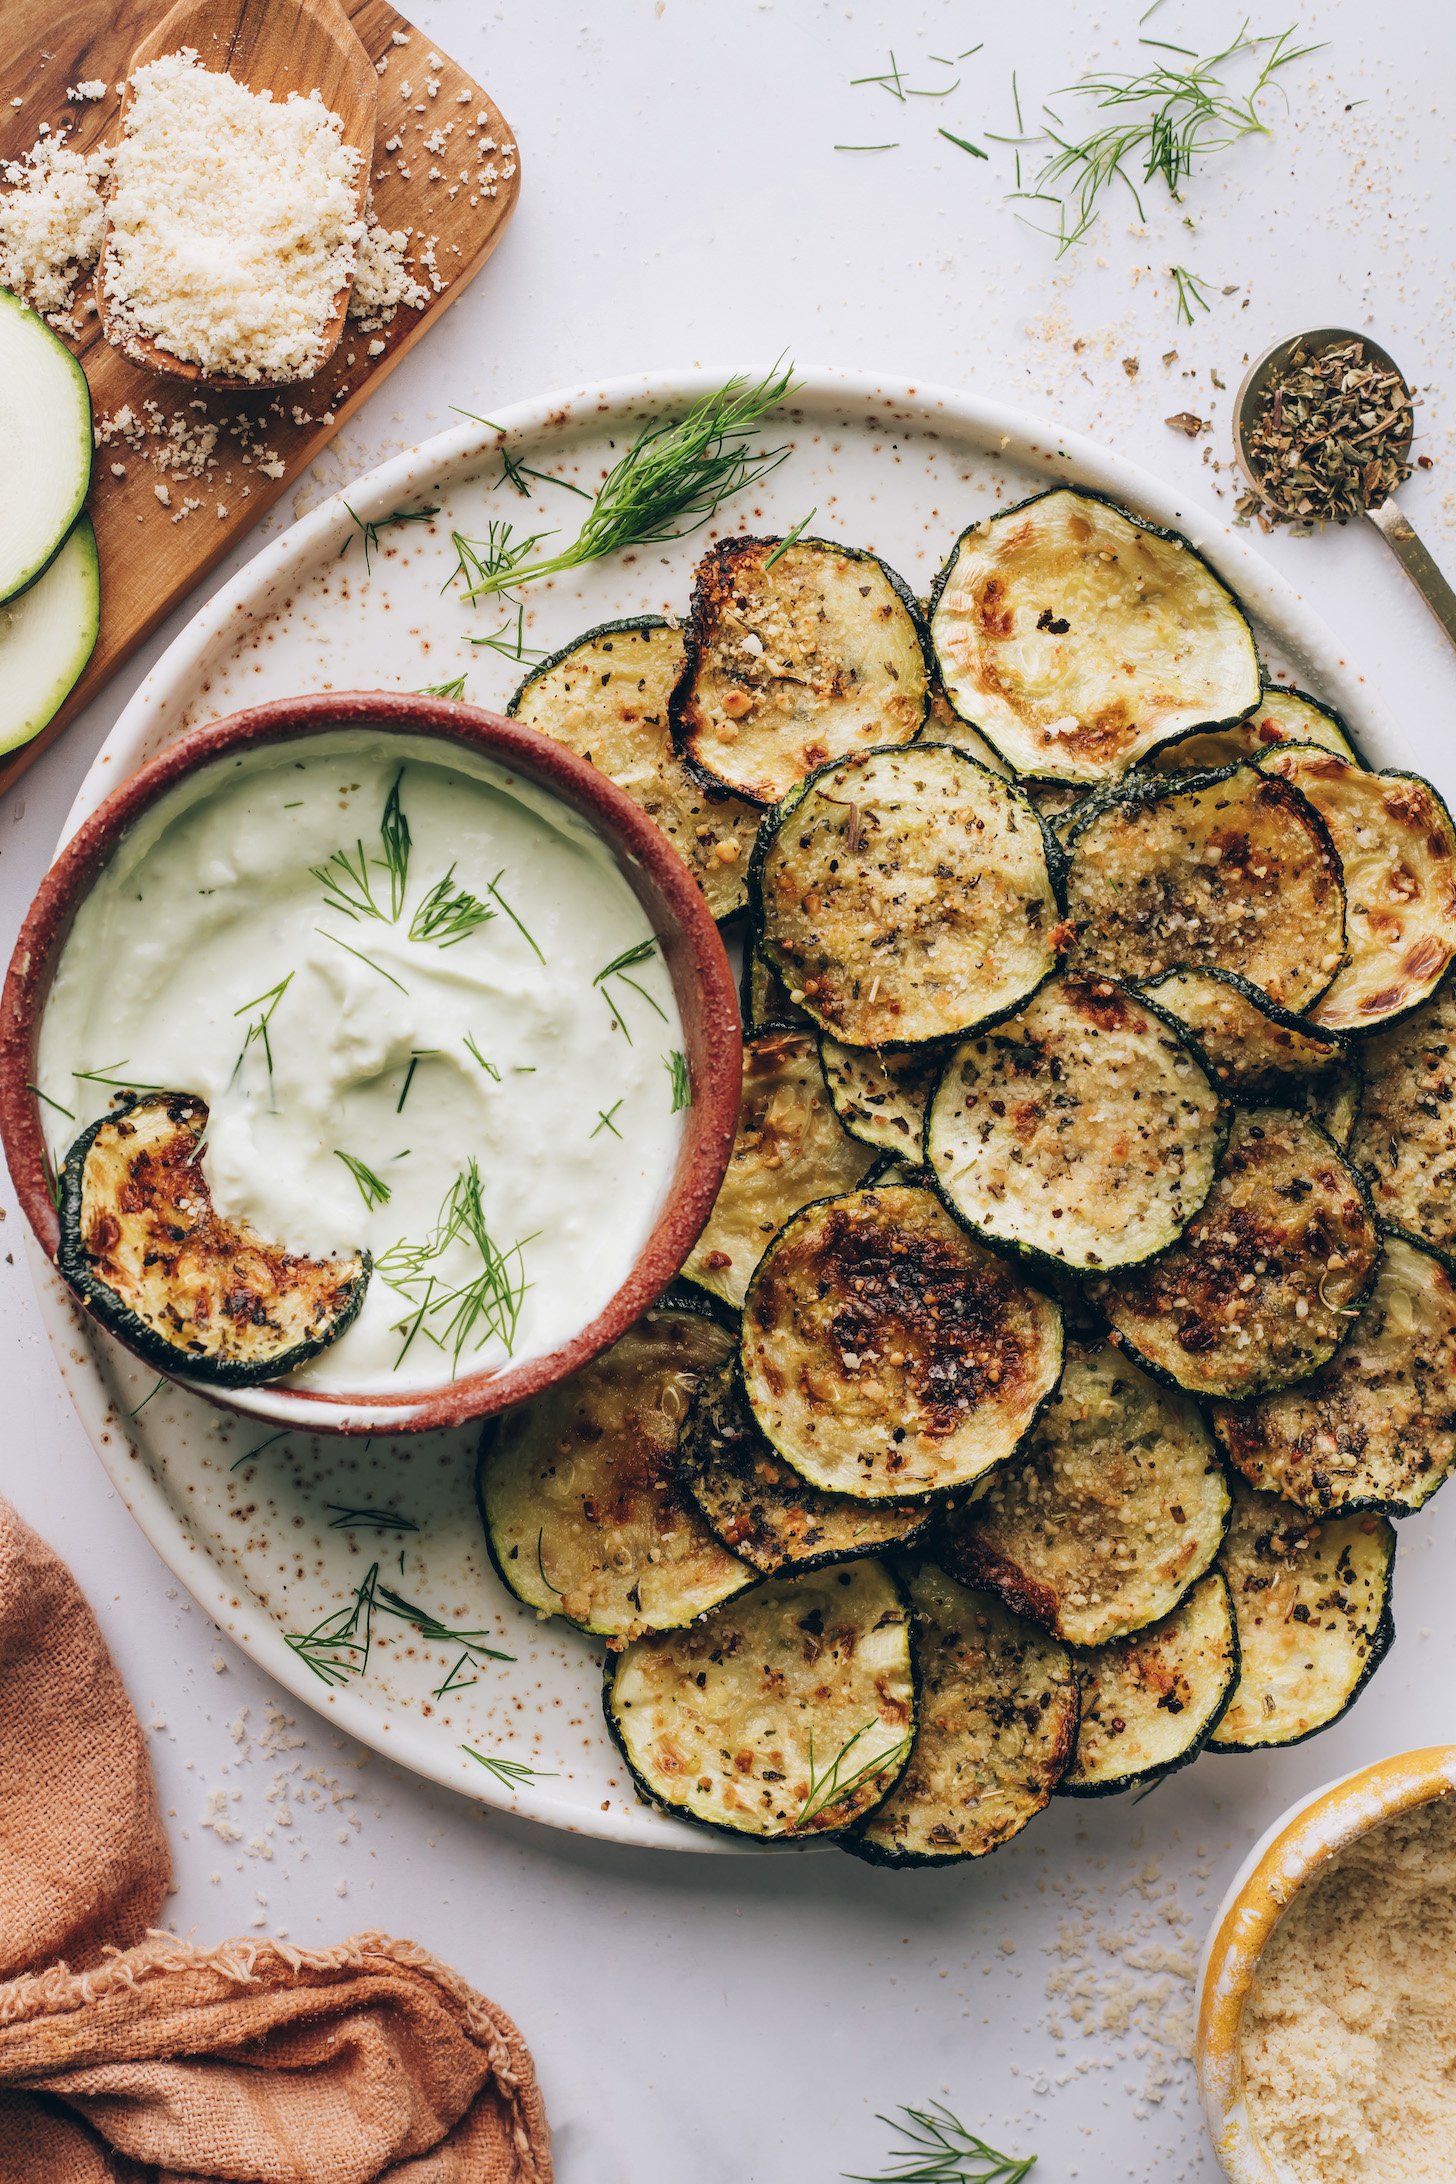 Baked Zucchini Slices with Vegan “Parmesan”